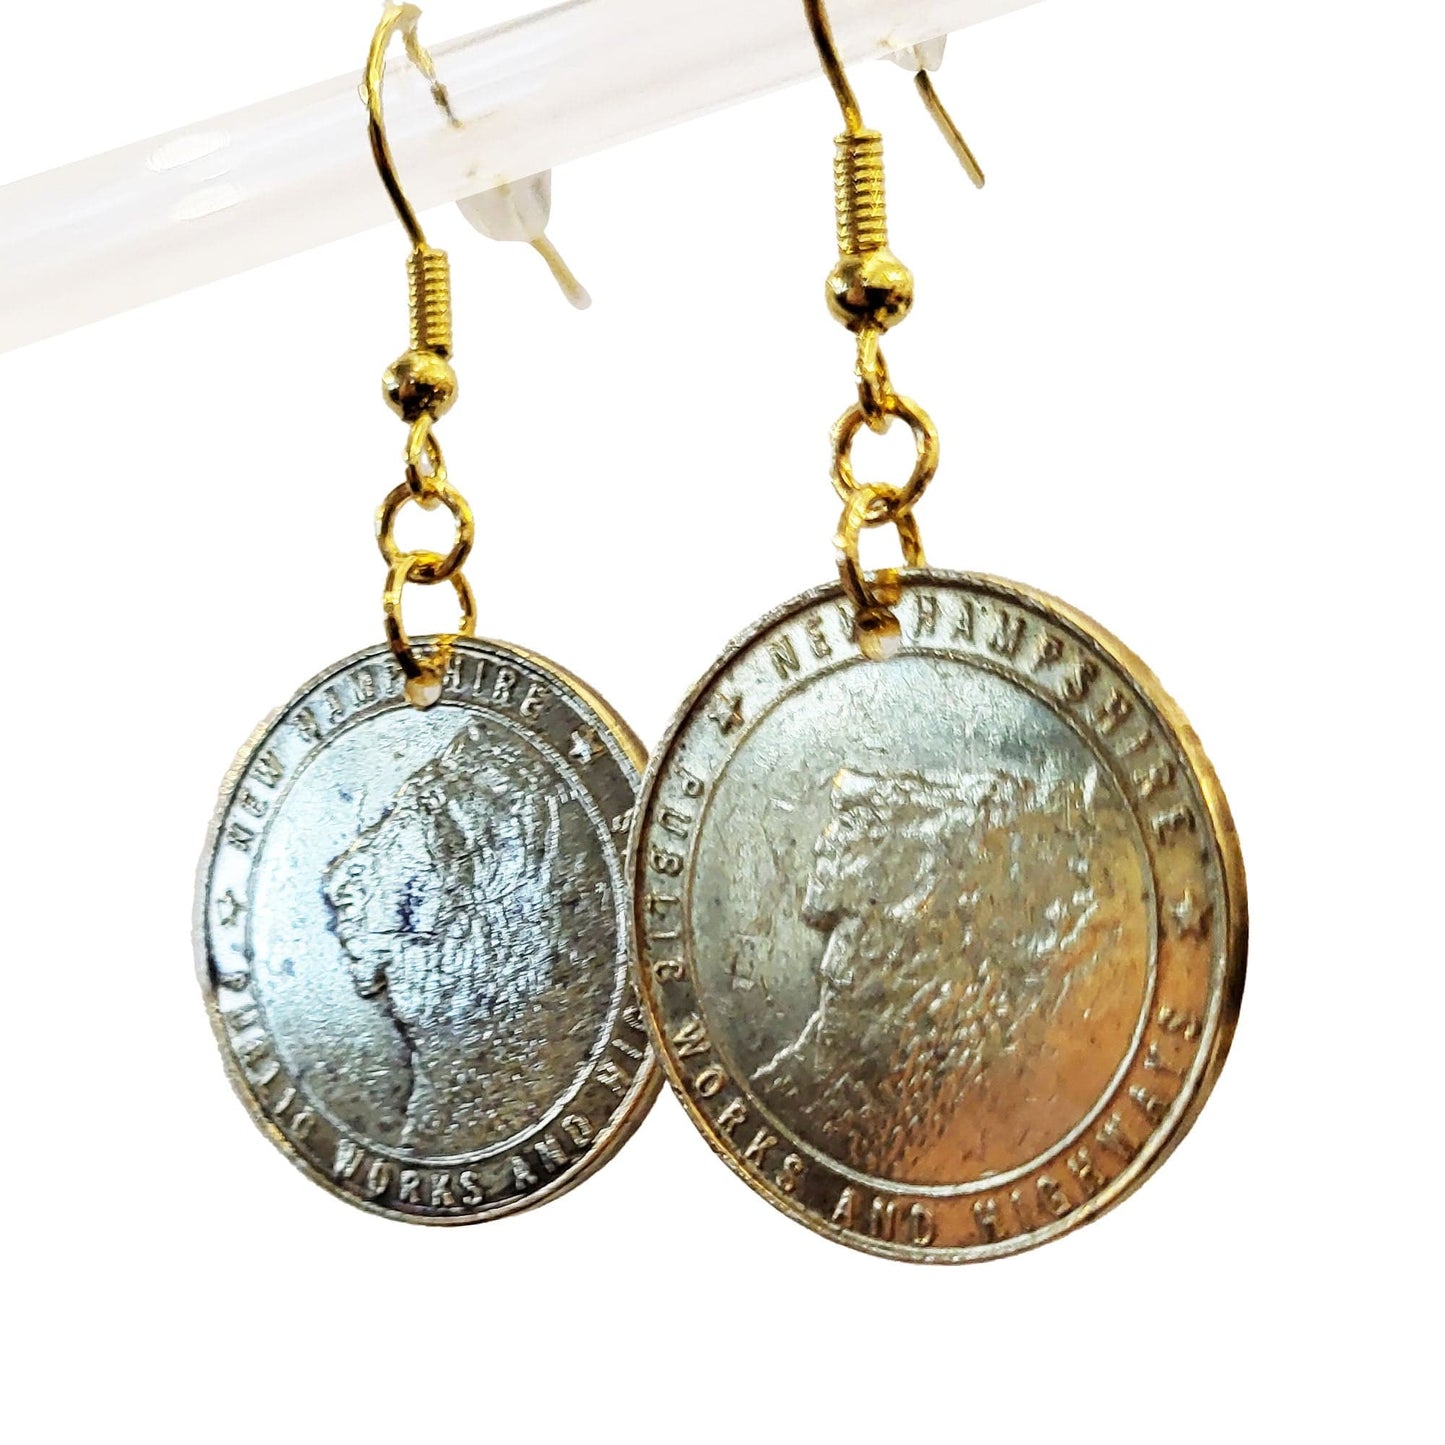 New Hampshire Toll Token Earrings